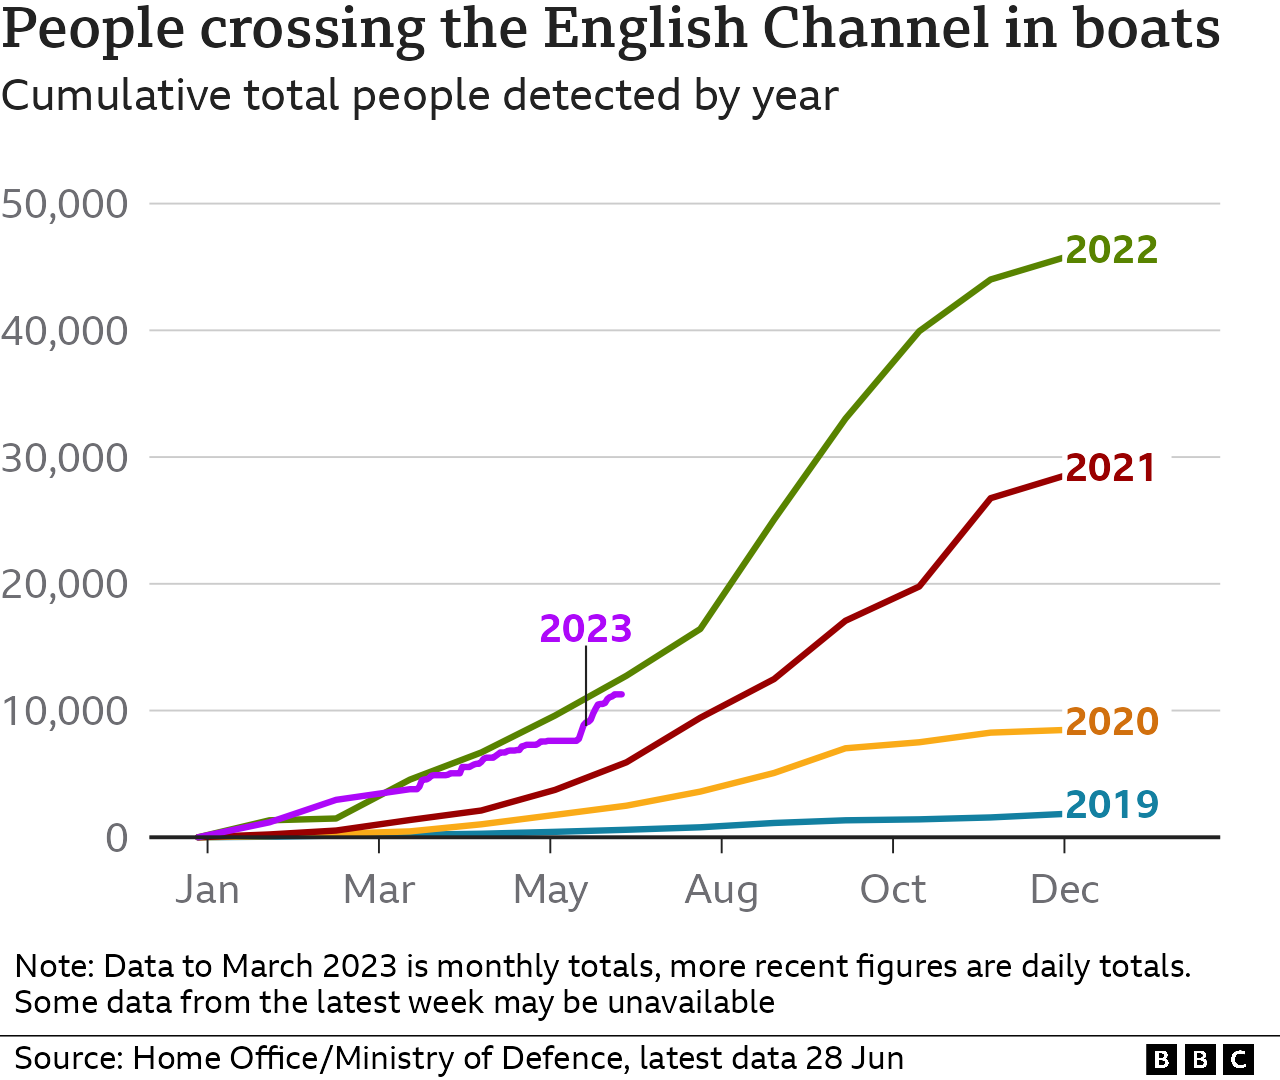 A line chart, where each line represents a year from 2019 up to 2023, showing the cumulative number of people detected crossing the English Channel on small boats between January and December. The total gets progressively higher year-on-year, with nearly 46,000 people detected by the end of 2022. The 2023 data goes up to 28 June and is about 11,300, slightly below the levels seen at the same time in 2022.